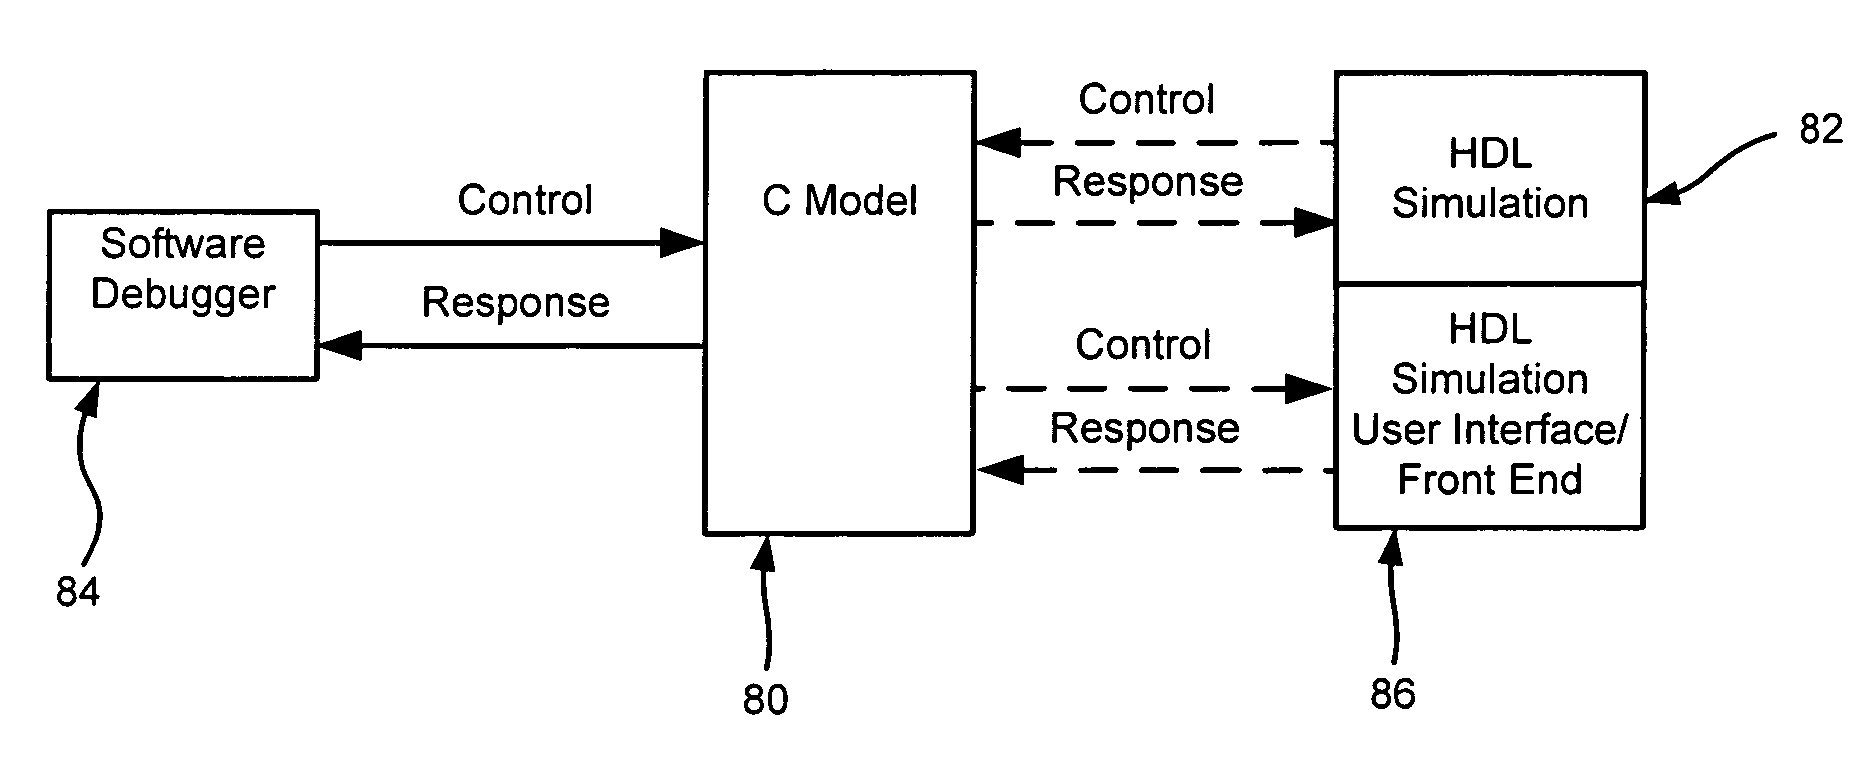 Simulation of hardware and software